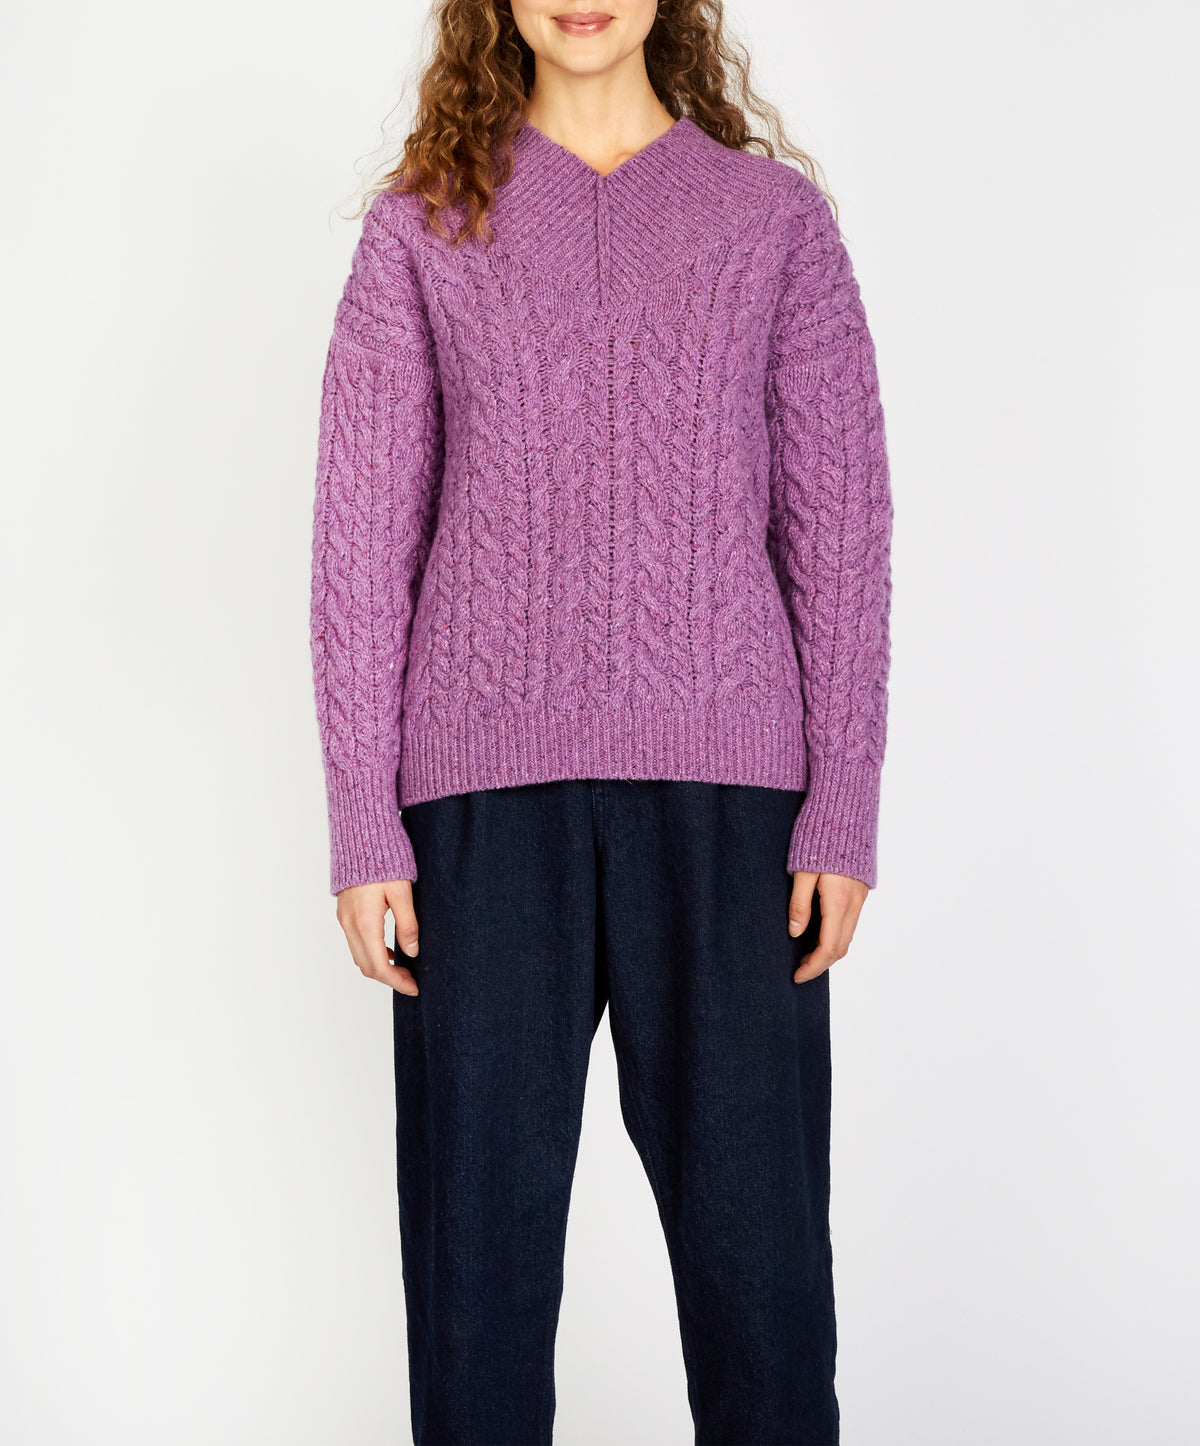 SOLSTICE CABLE KNIT SWEATER - ORCHID